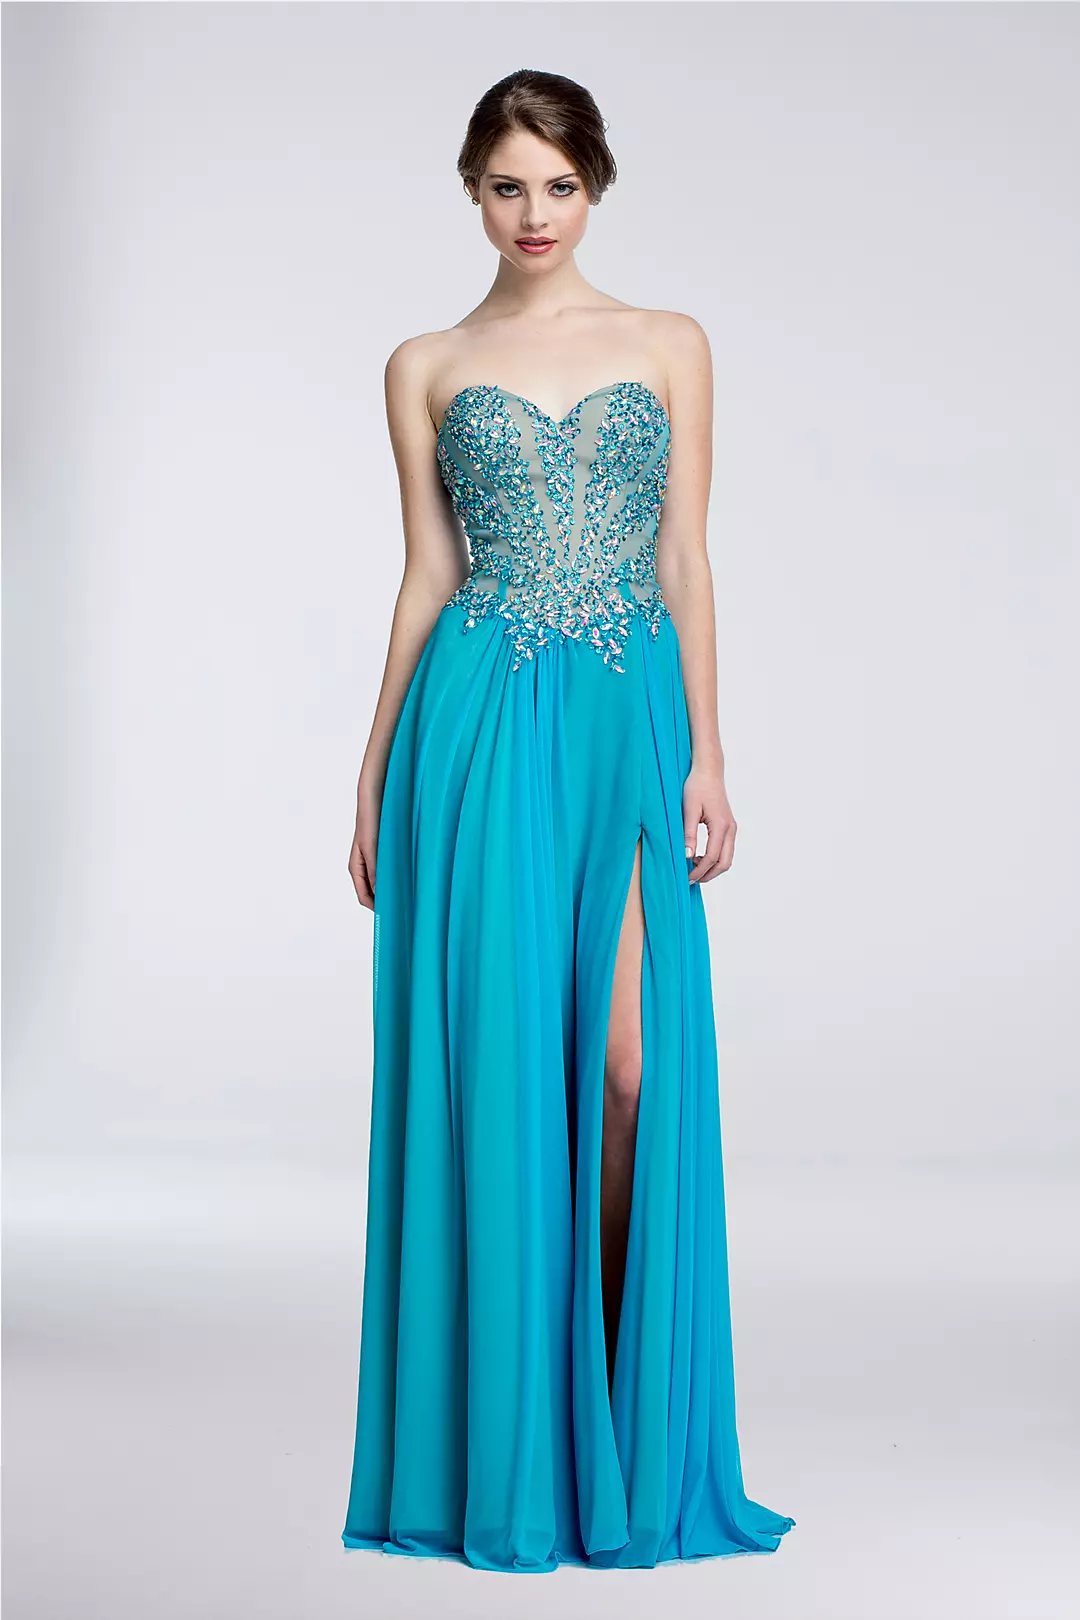 Strapless A-Line Dress with Beaded Illusion Mesh  Image